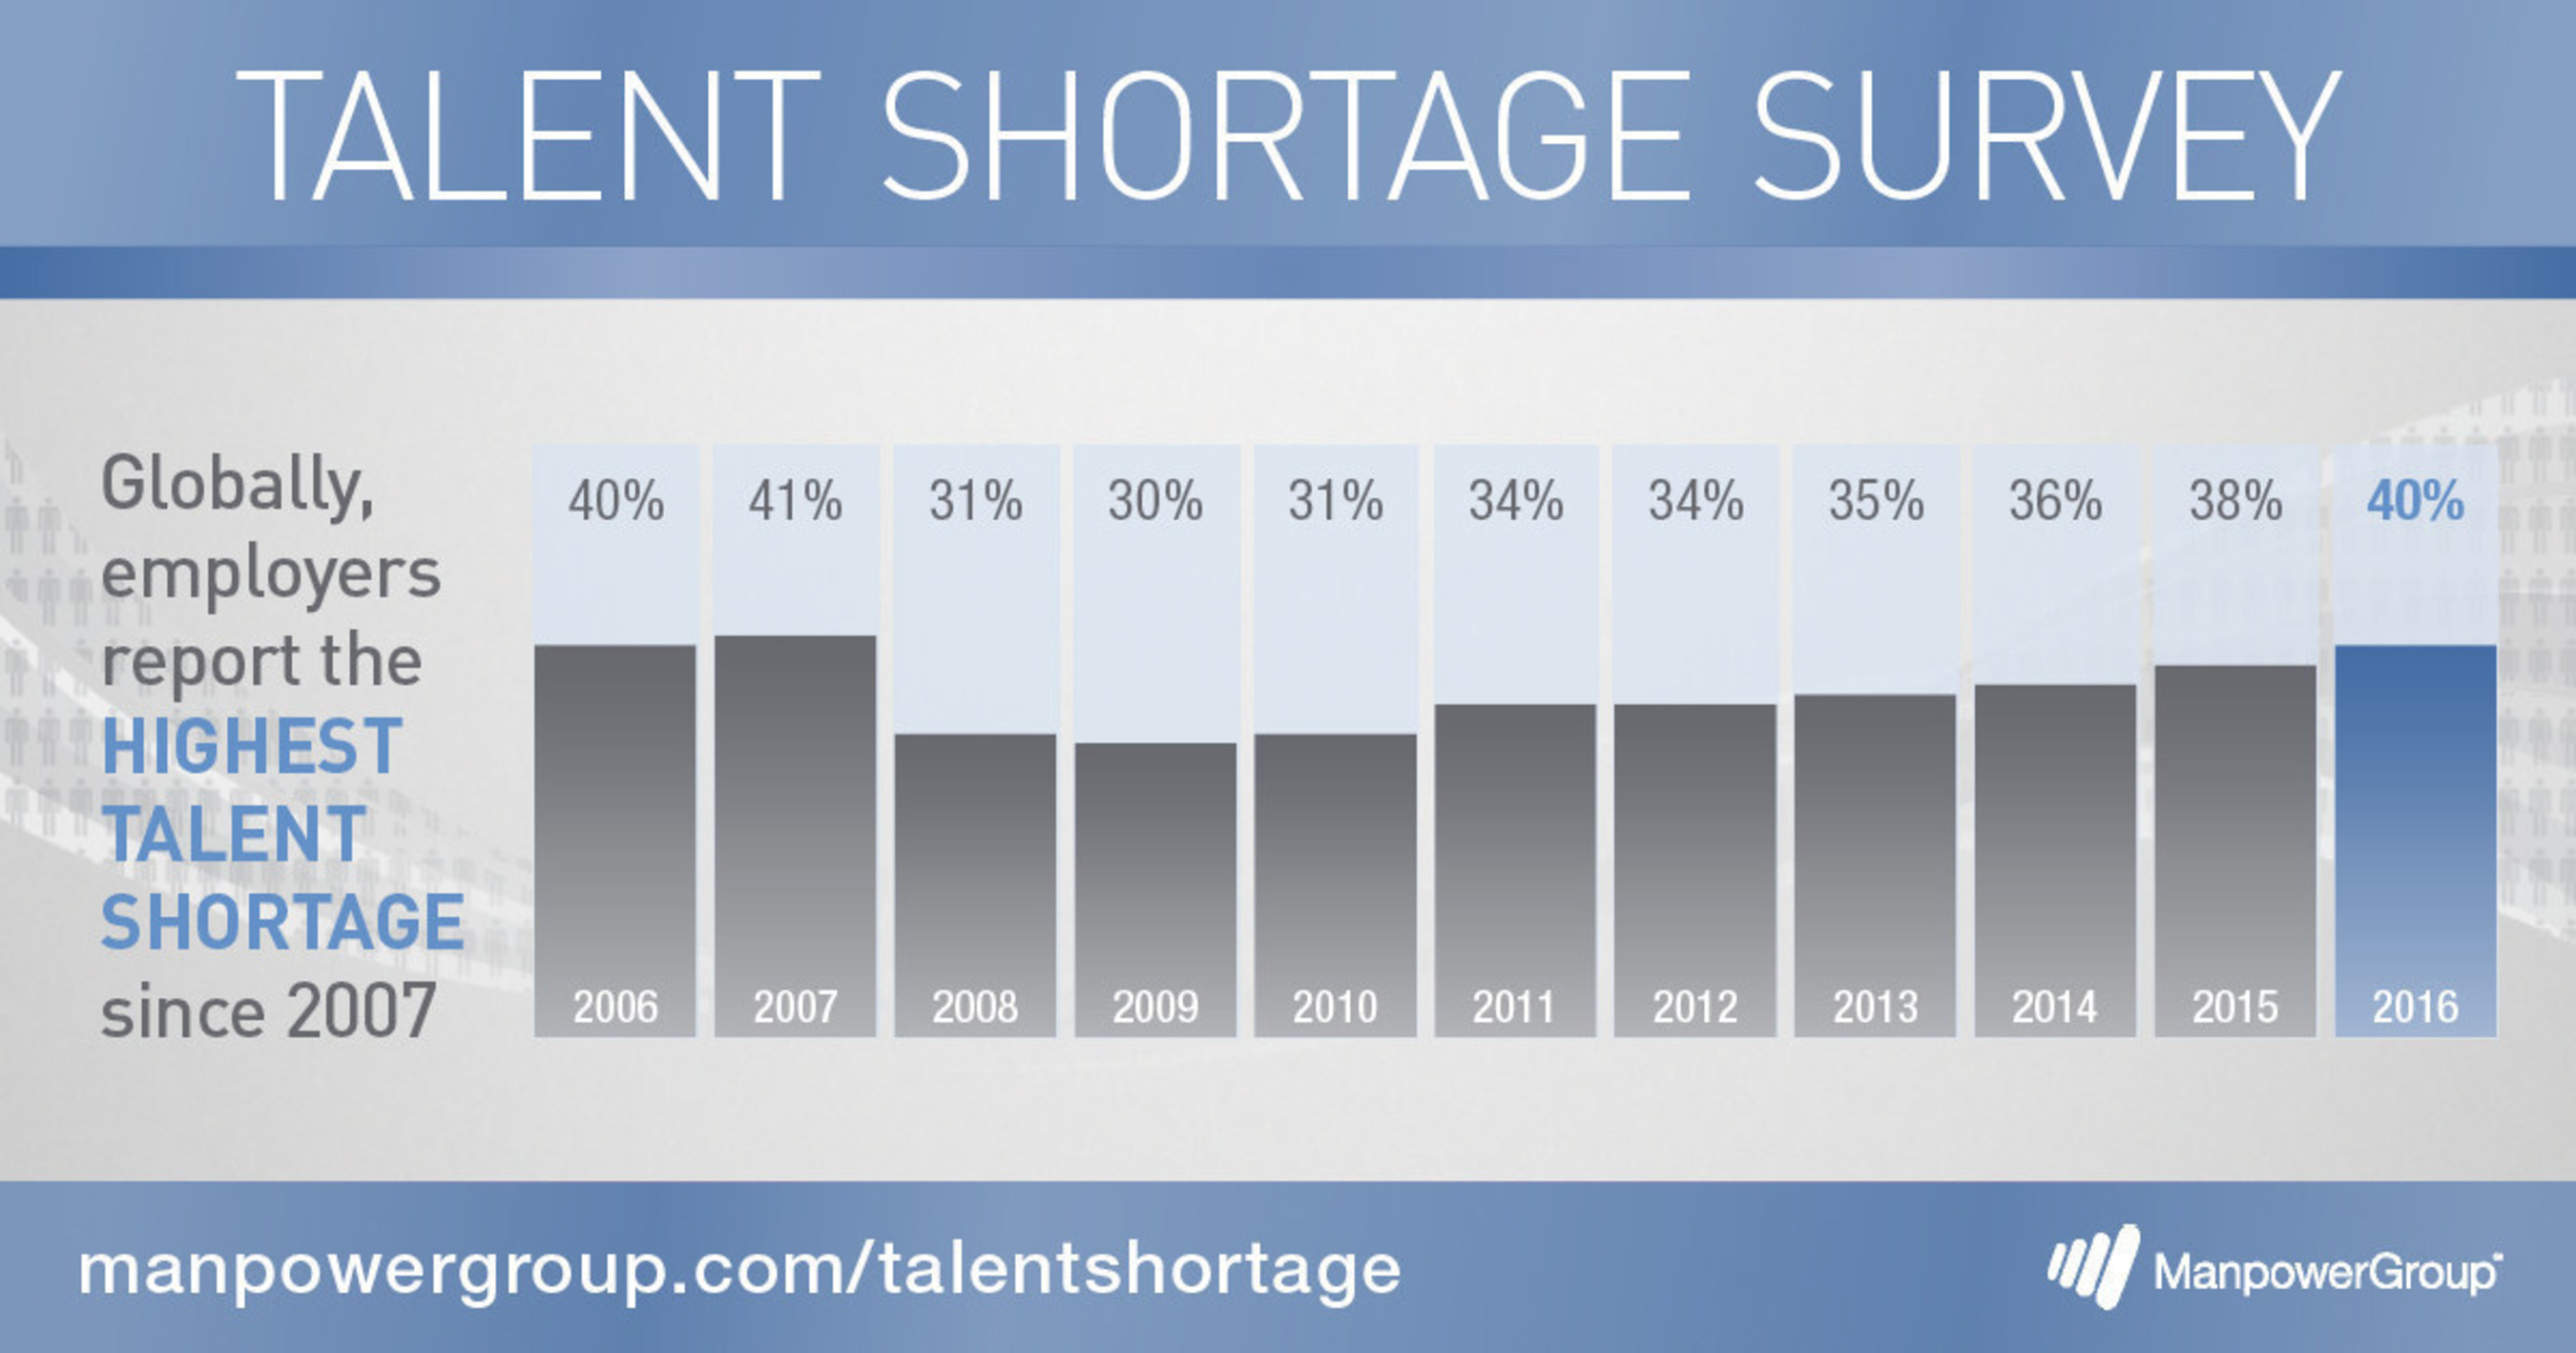 Globally, employers report the highest talent shortage since 2007.